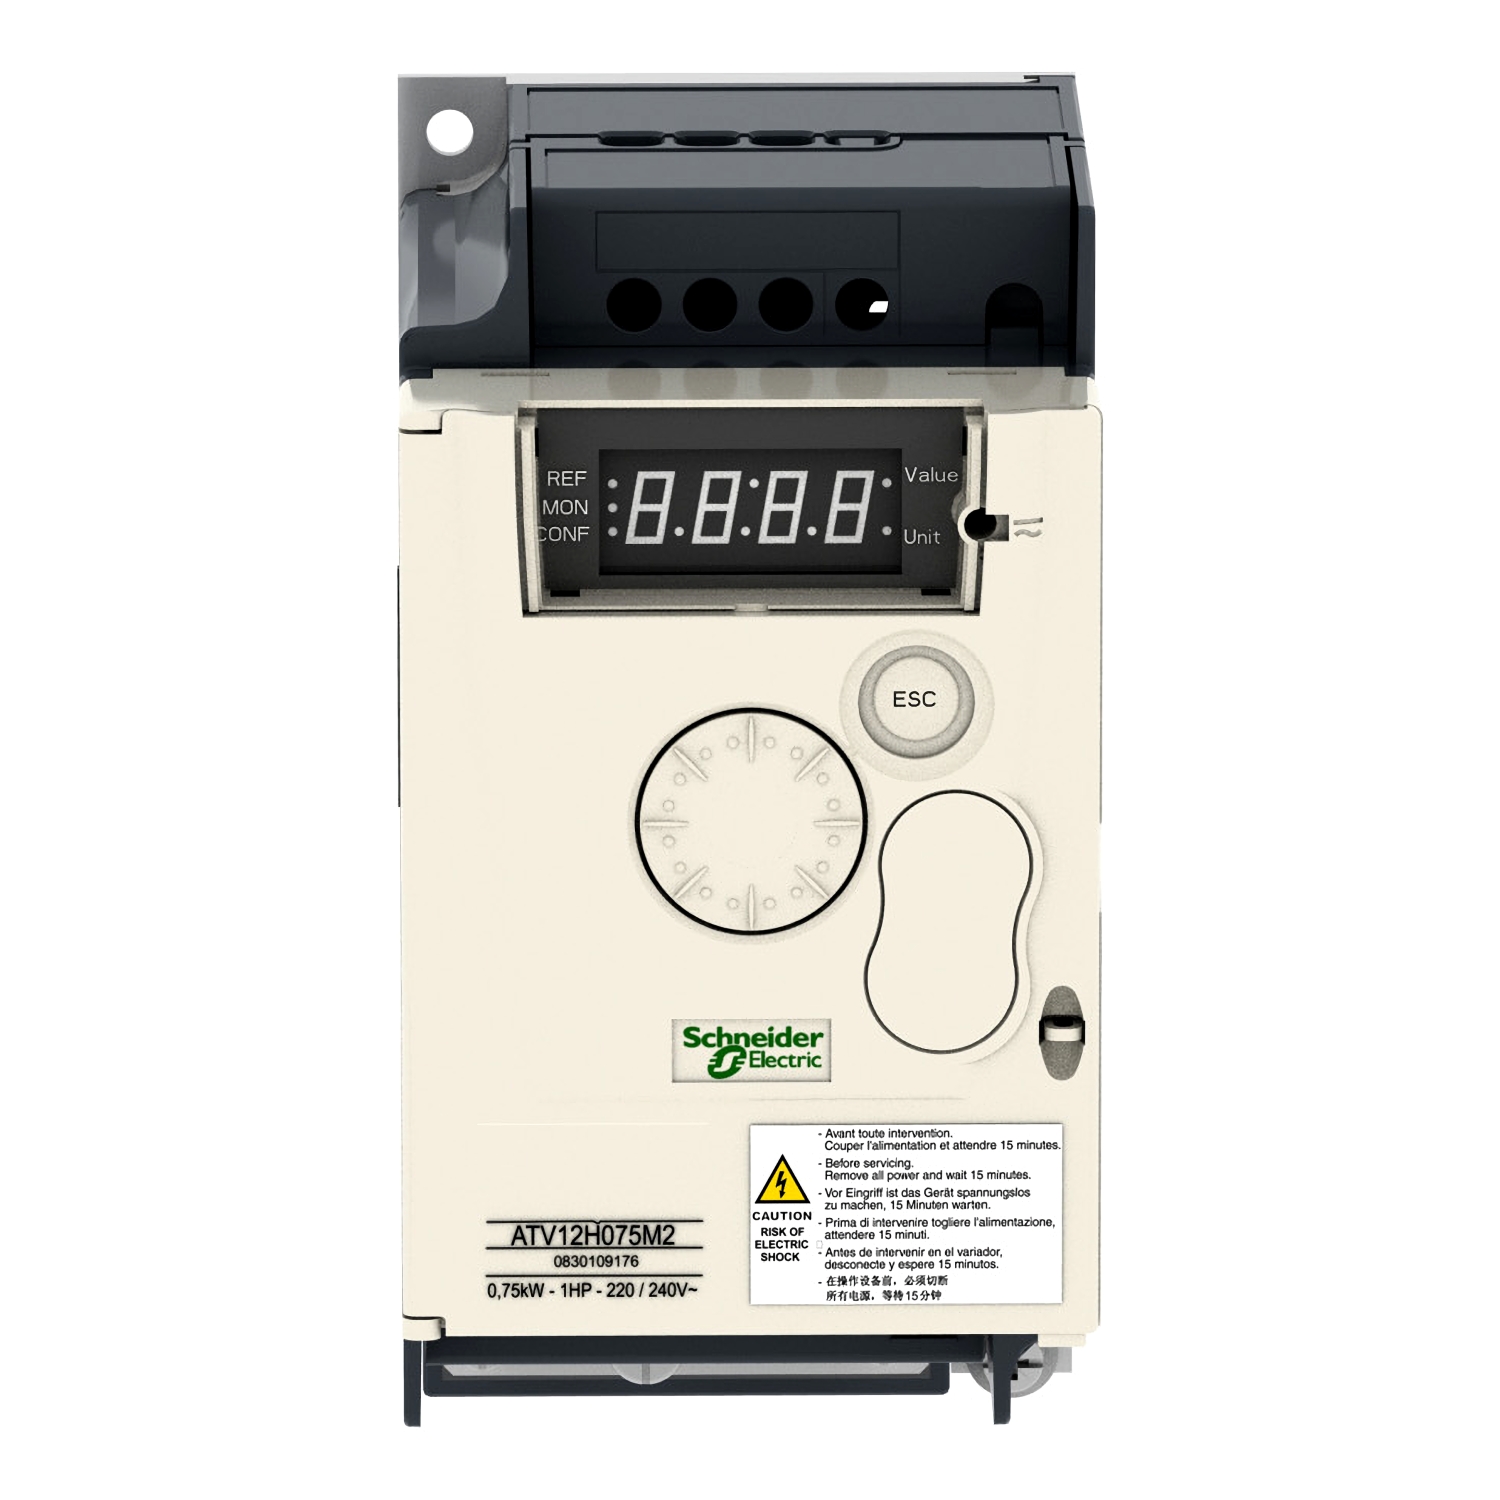 ATV12H075M2 - variable speed drive, Altivar 12, 0.75kW, 1hp, 200 to 240V, 1  phase, with heat sink